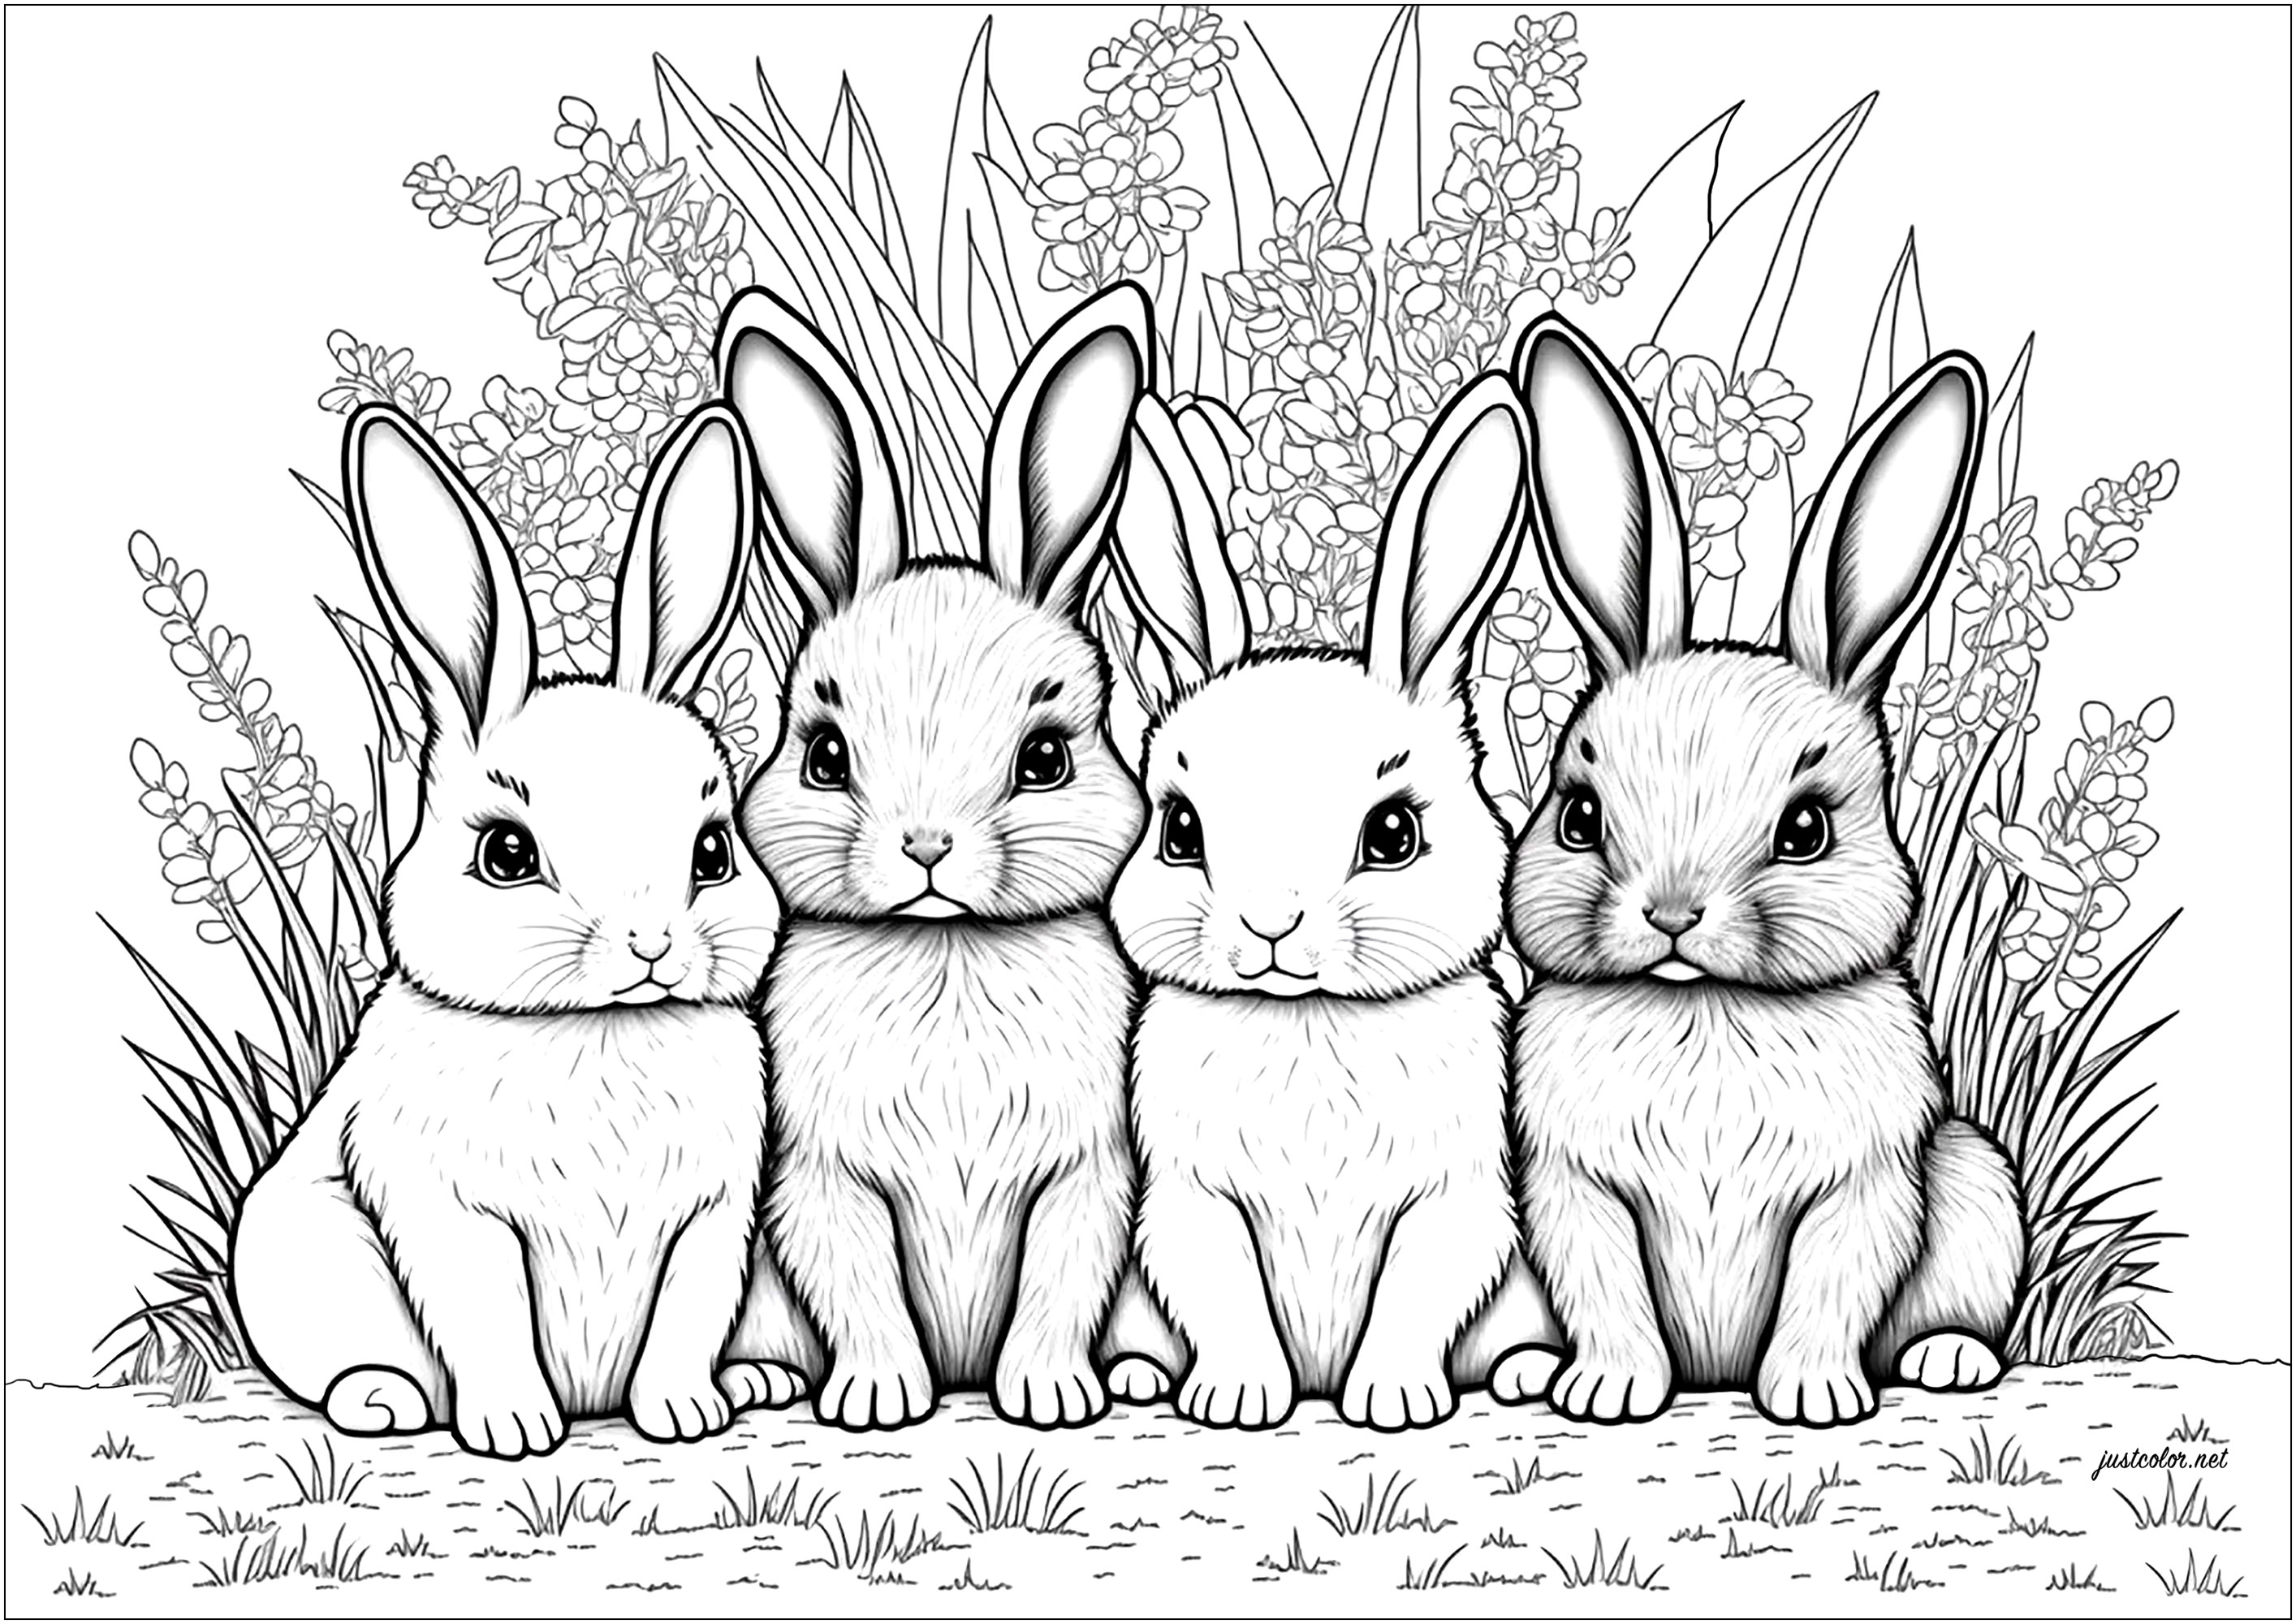 Four cute little rabbits to color, with a leafy background. This coloring page is as cute as a button! Four little rabbits, each more adorable than the last, are waiting for you, ready to be colored. They're all sitting on their hind legs, with long ears and big eyes, and are surrounded by a leafy background.